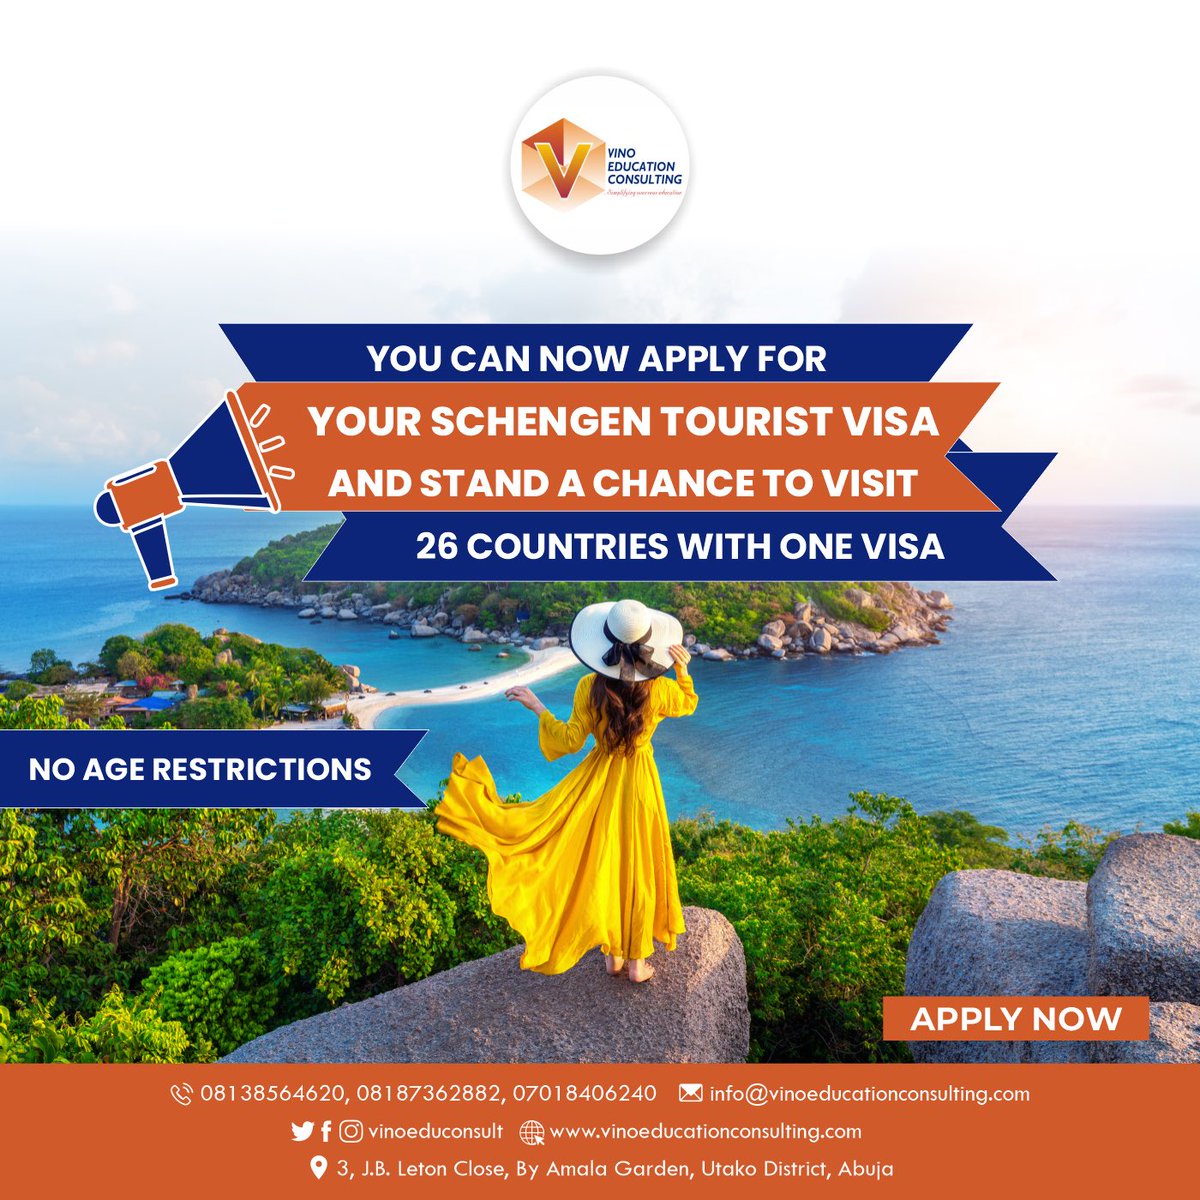 🌎 ✈️ We are tour gateway to thrilling tourism Visa! Get ready to explore new horizon, immerse in diverse cultures and make unforgettable memories with Tourism Visa!

Stay tuned for more exciting updates

#globaladventure @studyabroad #tourismvisa #Beckysangels #BBNaijaAllStars